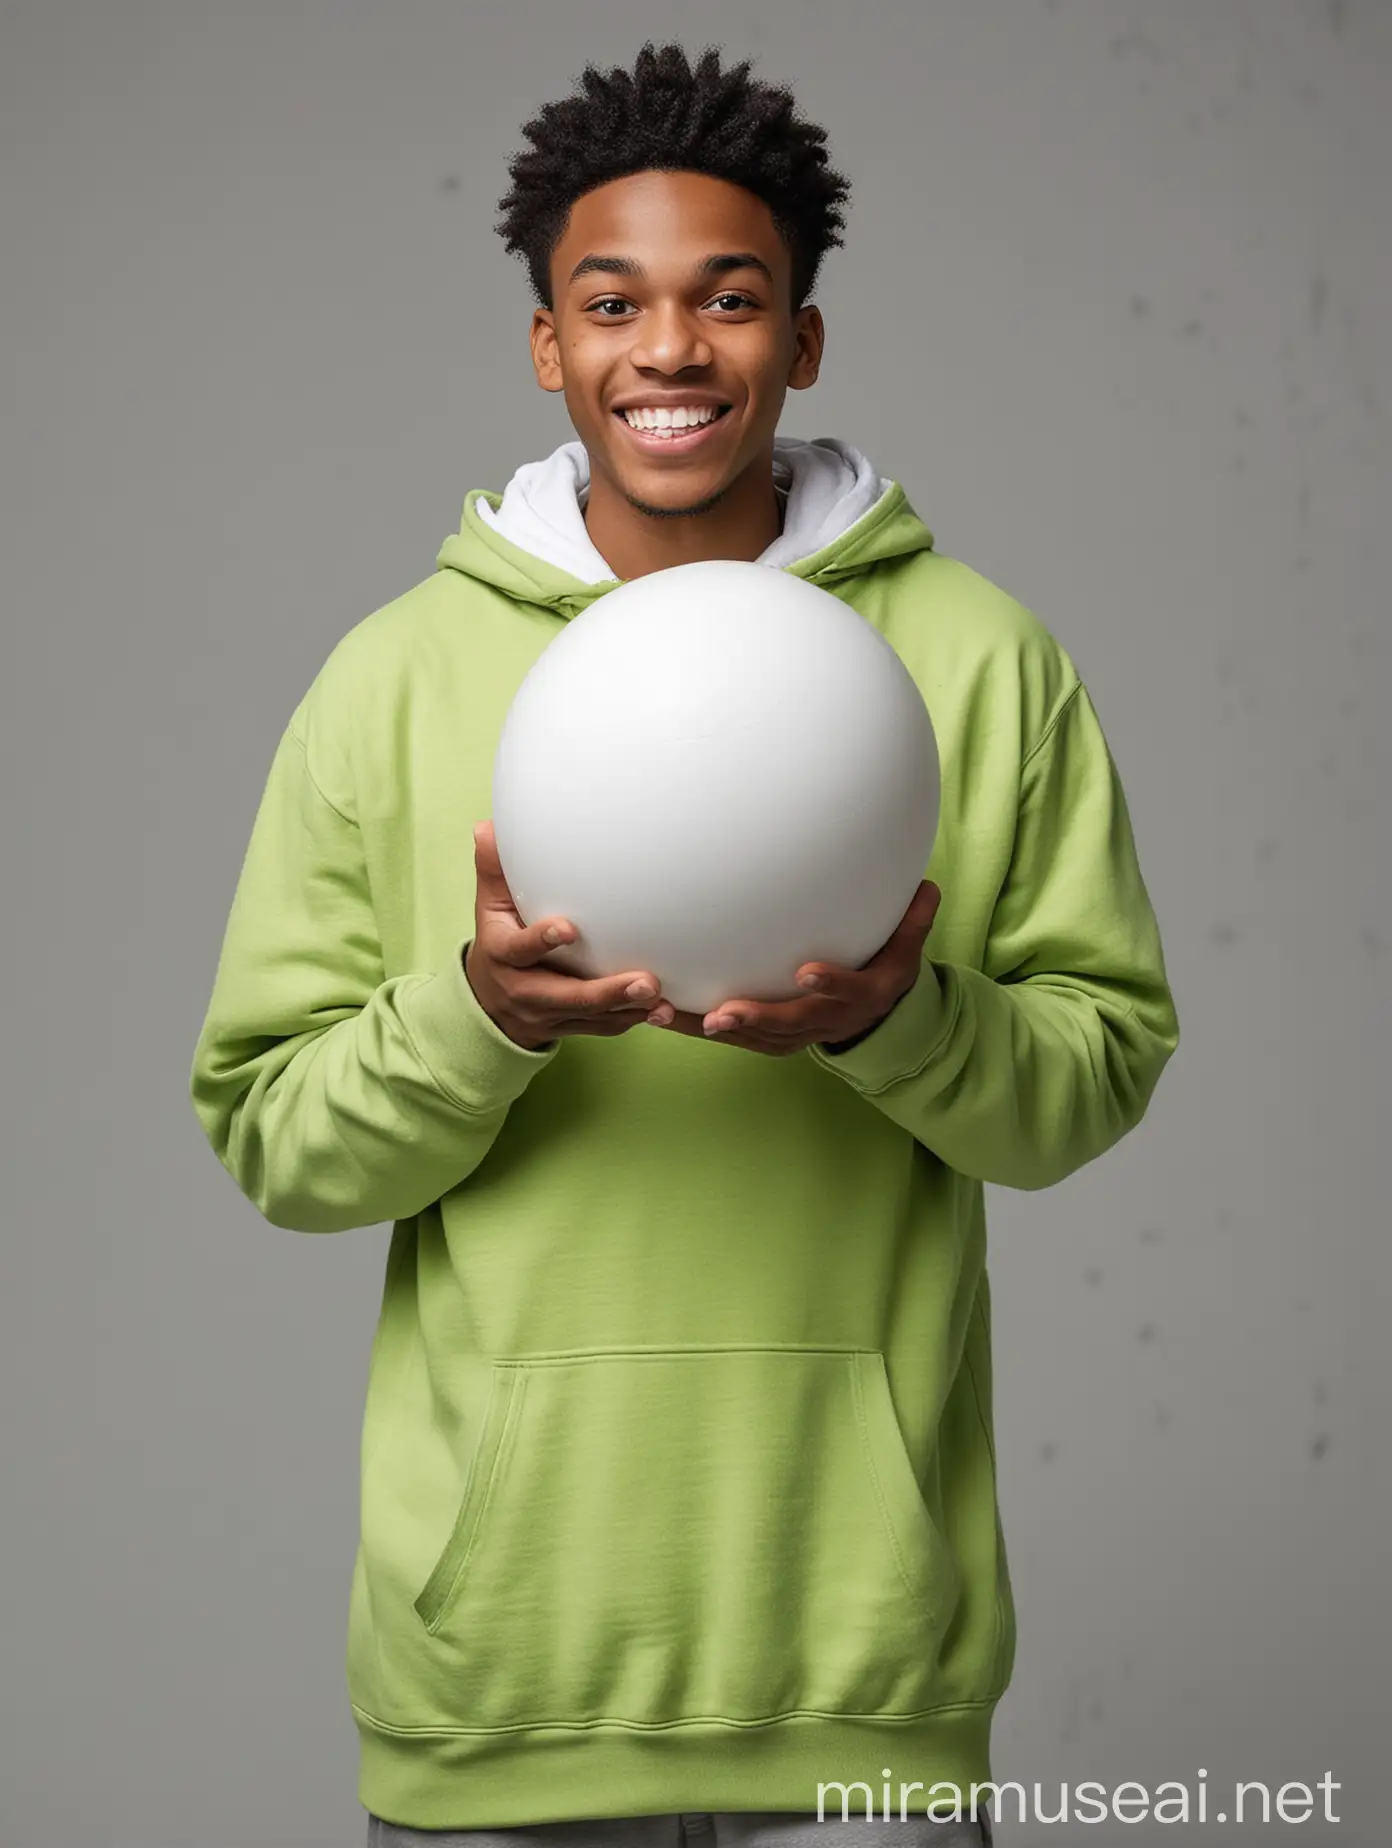 African American young man with cheerful expression , wearing a lime green hoodie sweatshirt , Holding a huge white round ball in the middle  ,standing against gray space, facing camera